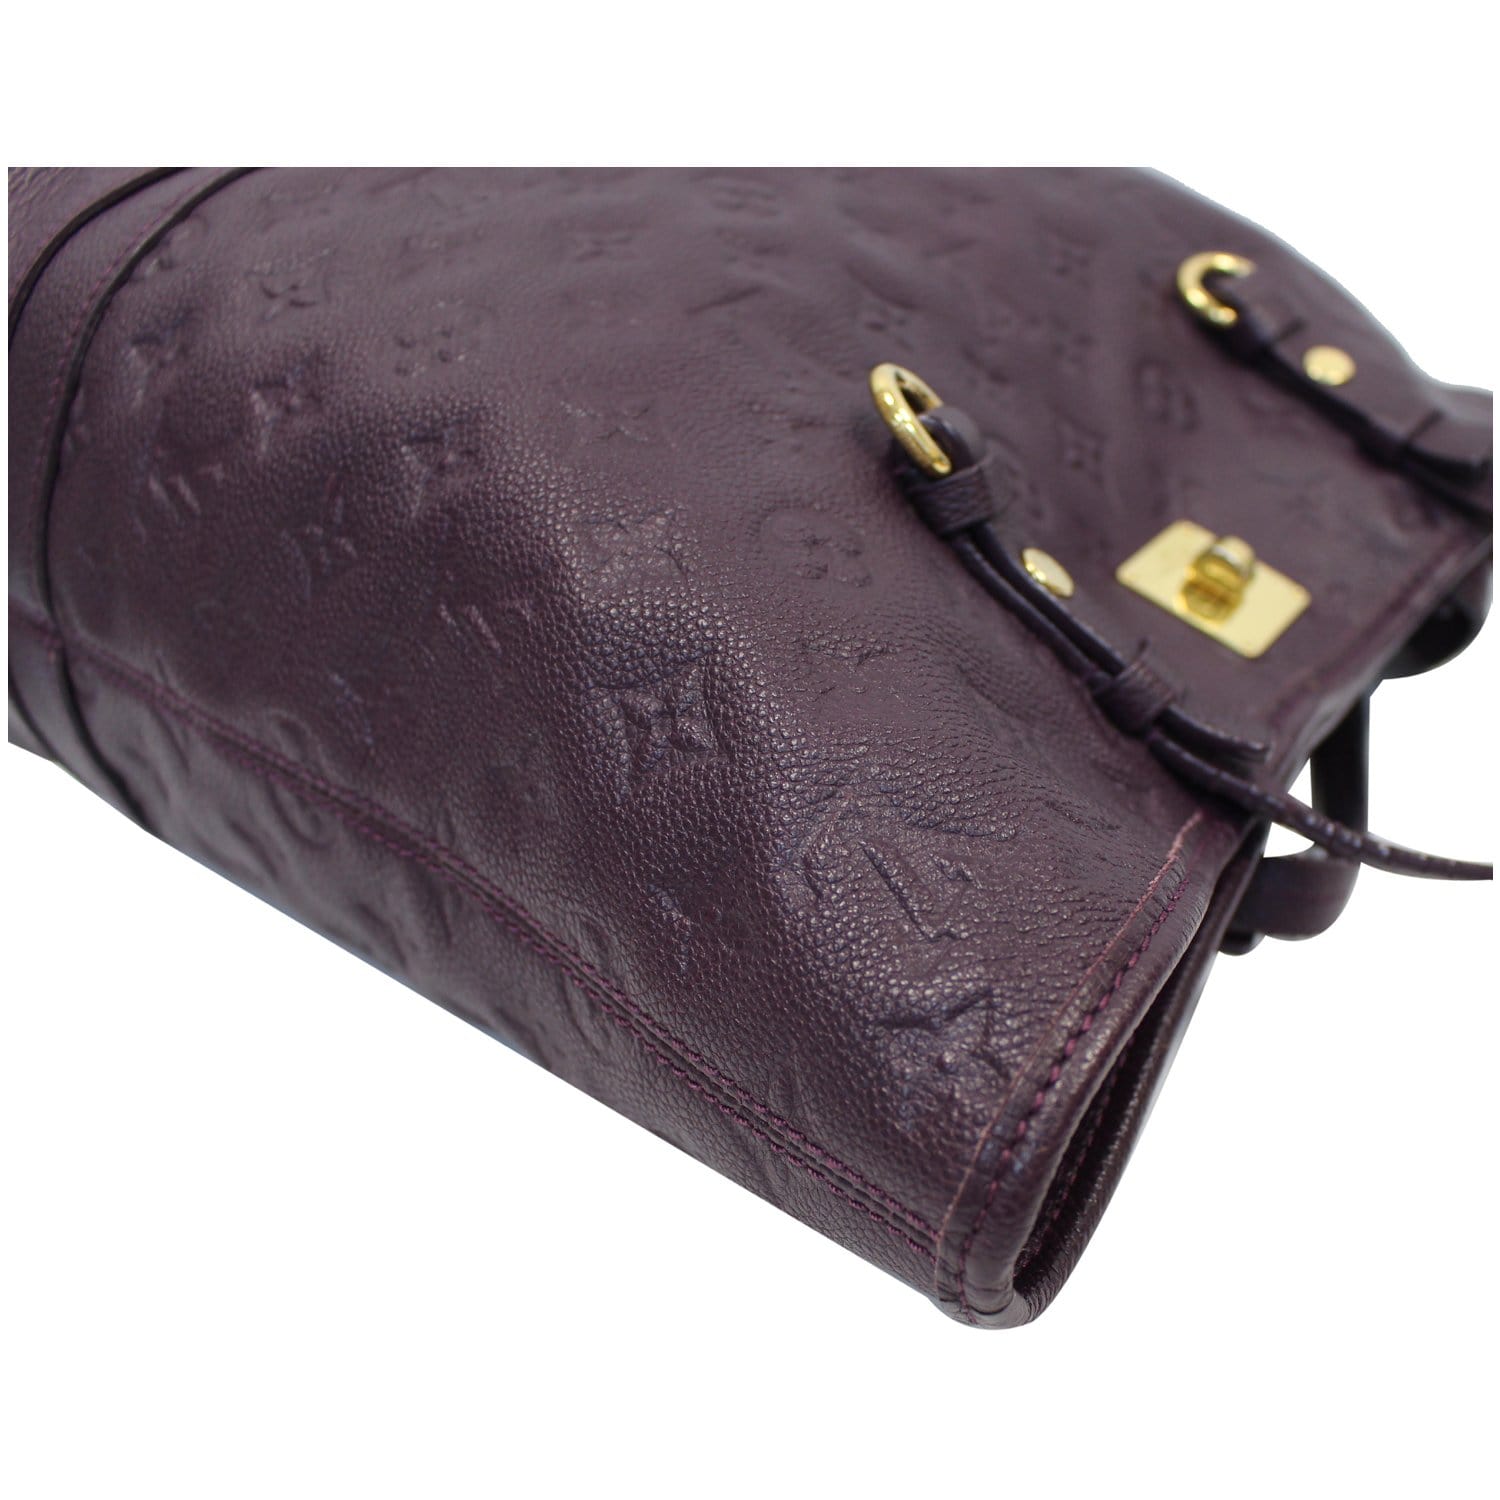 but Jennas C bag already looks pitted and worn, Louis Vuitton Editions  Limitées Wallet 379116